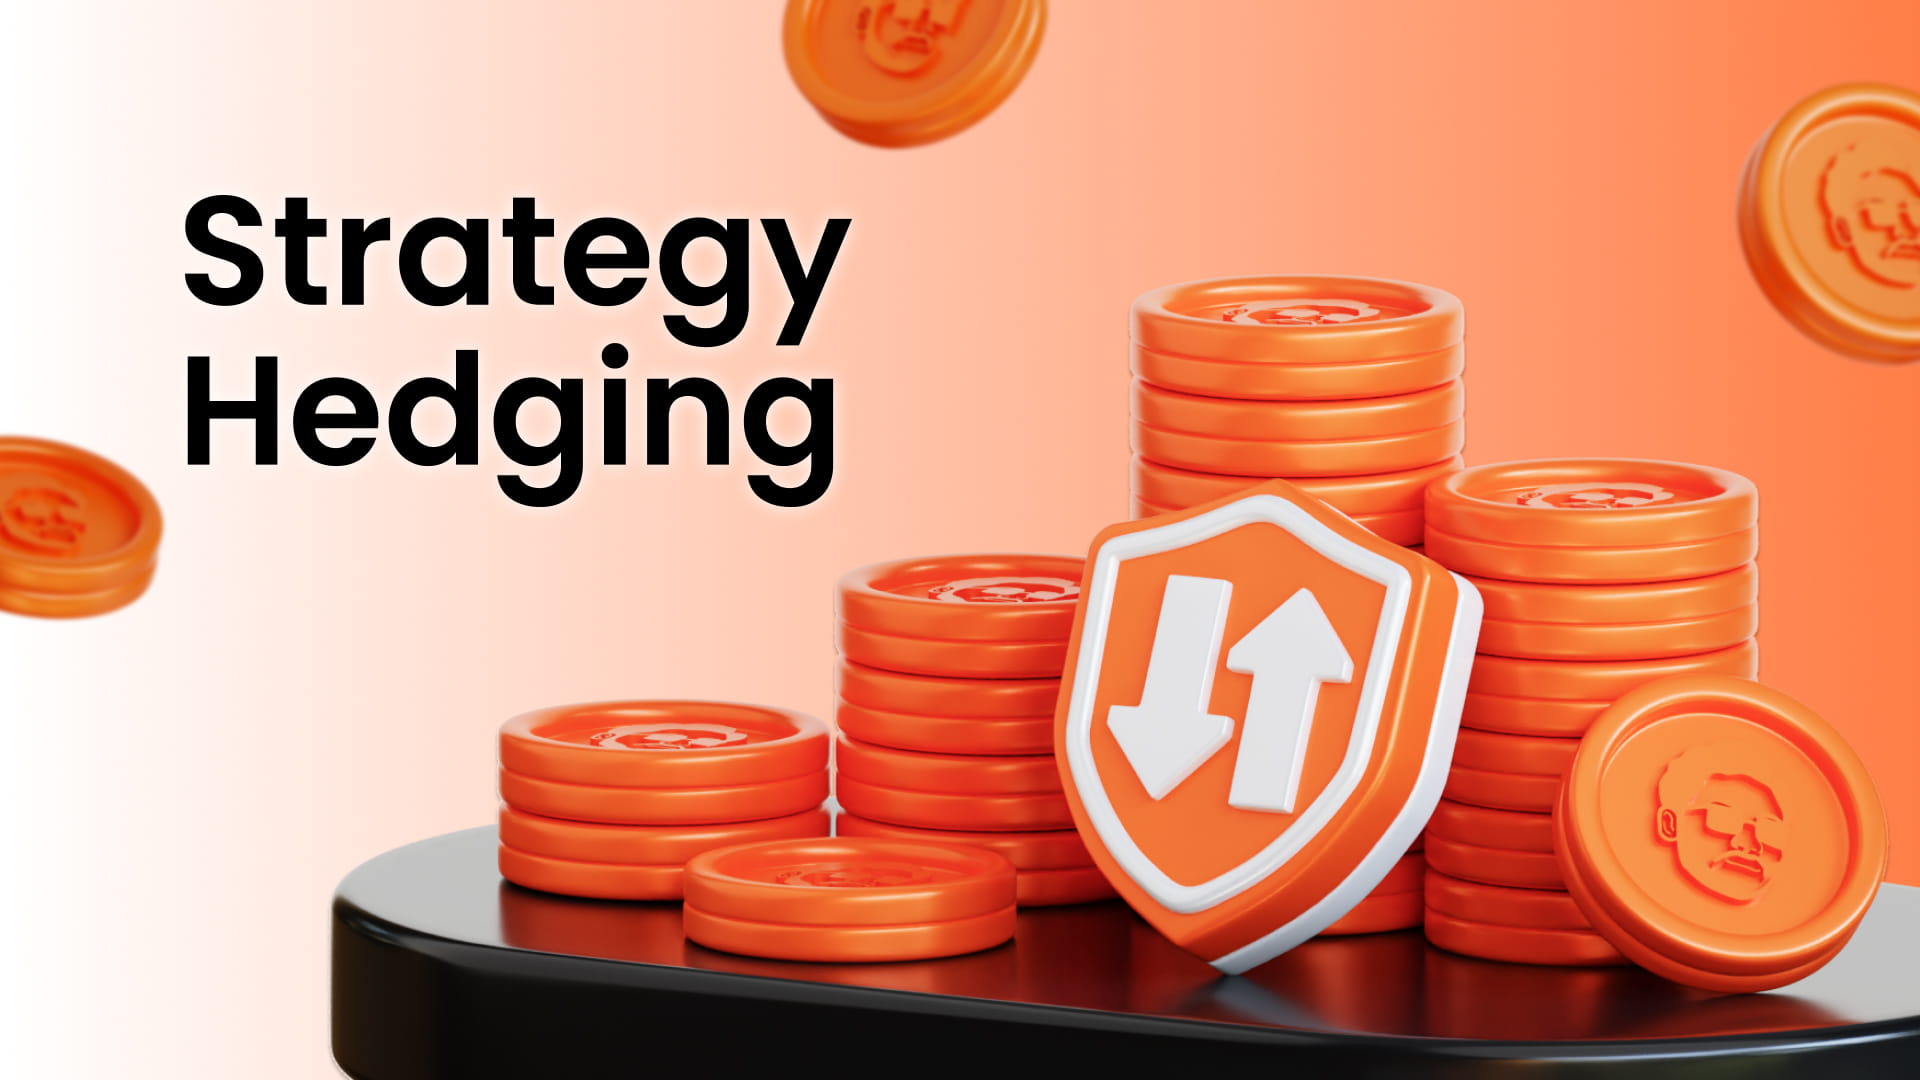 Important Strategies for Hedging Your Assets